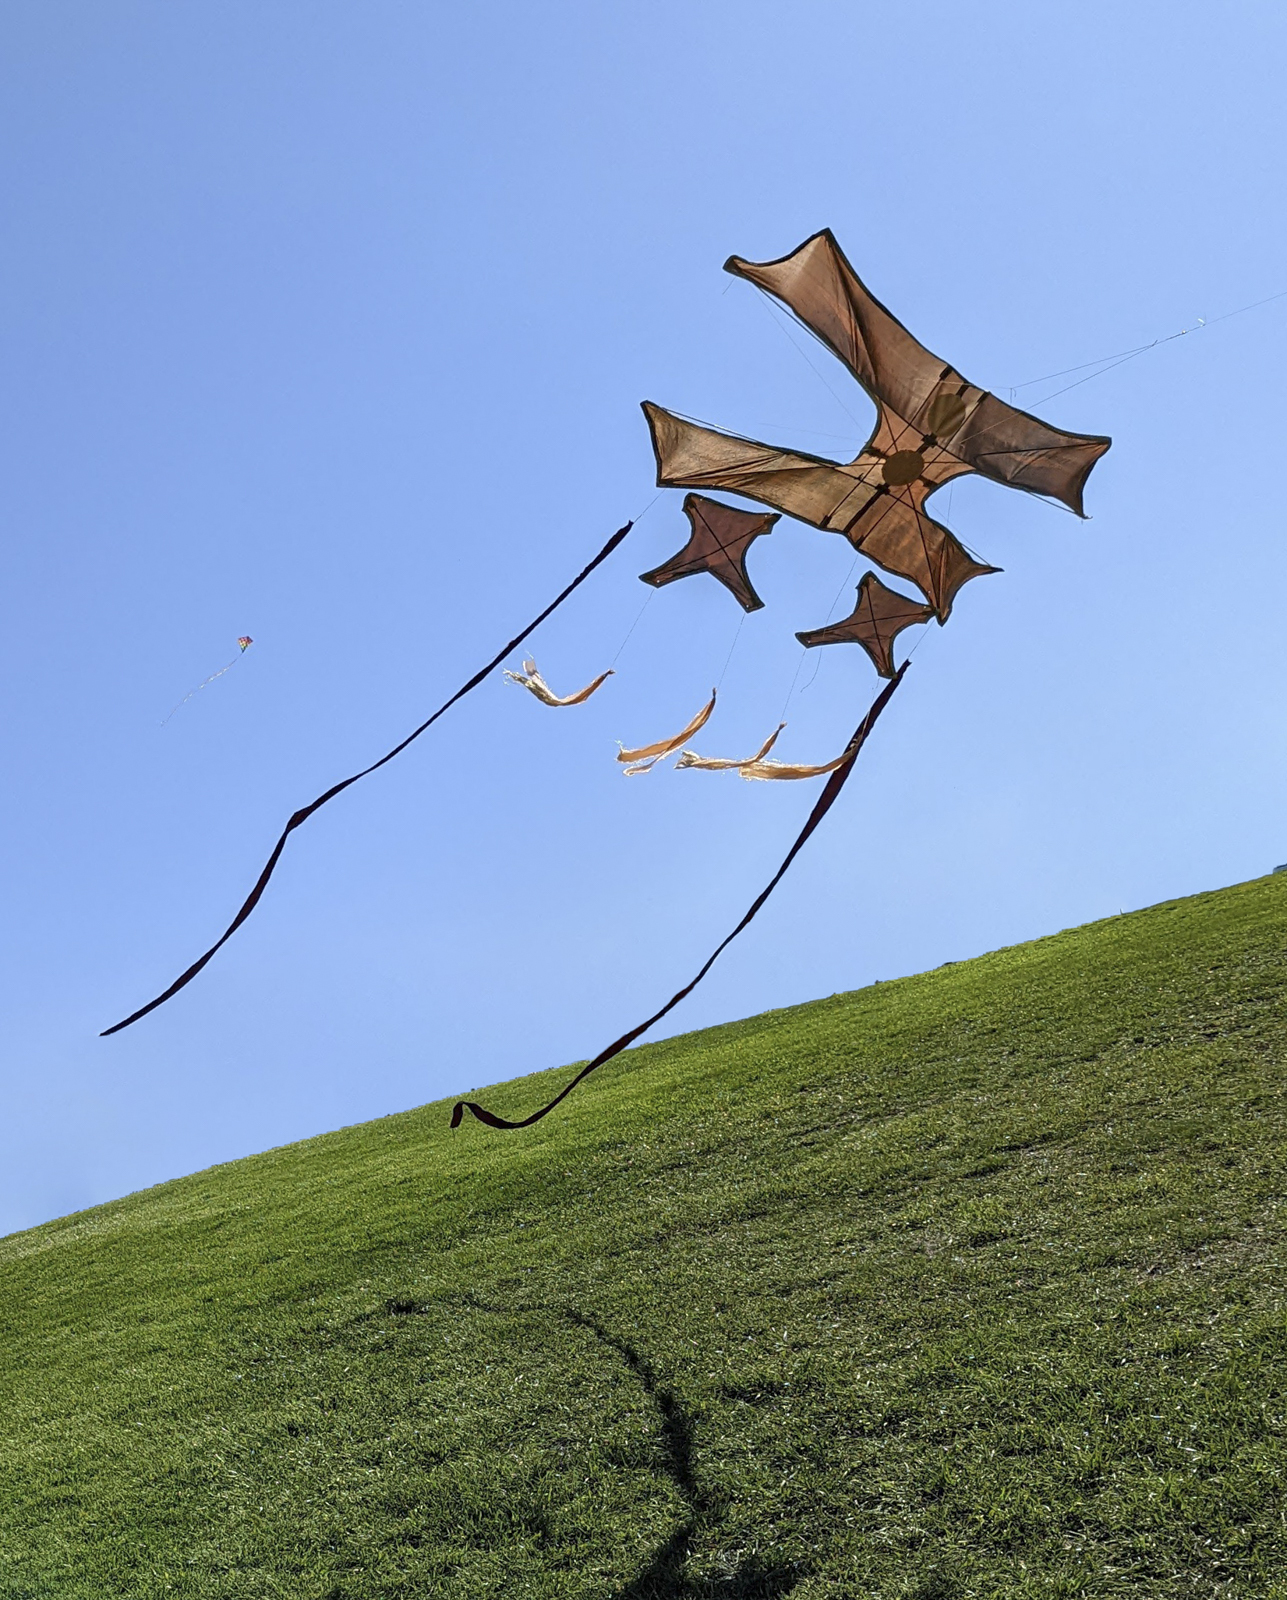 a kite flies against a blue sky and green field. The kite has six tails flying from it.